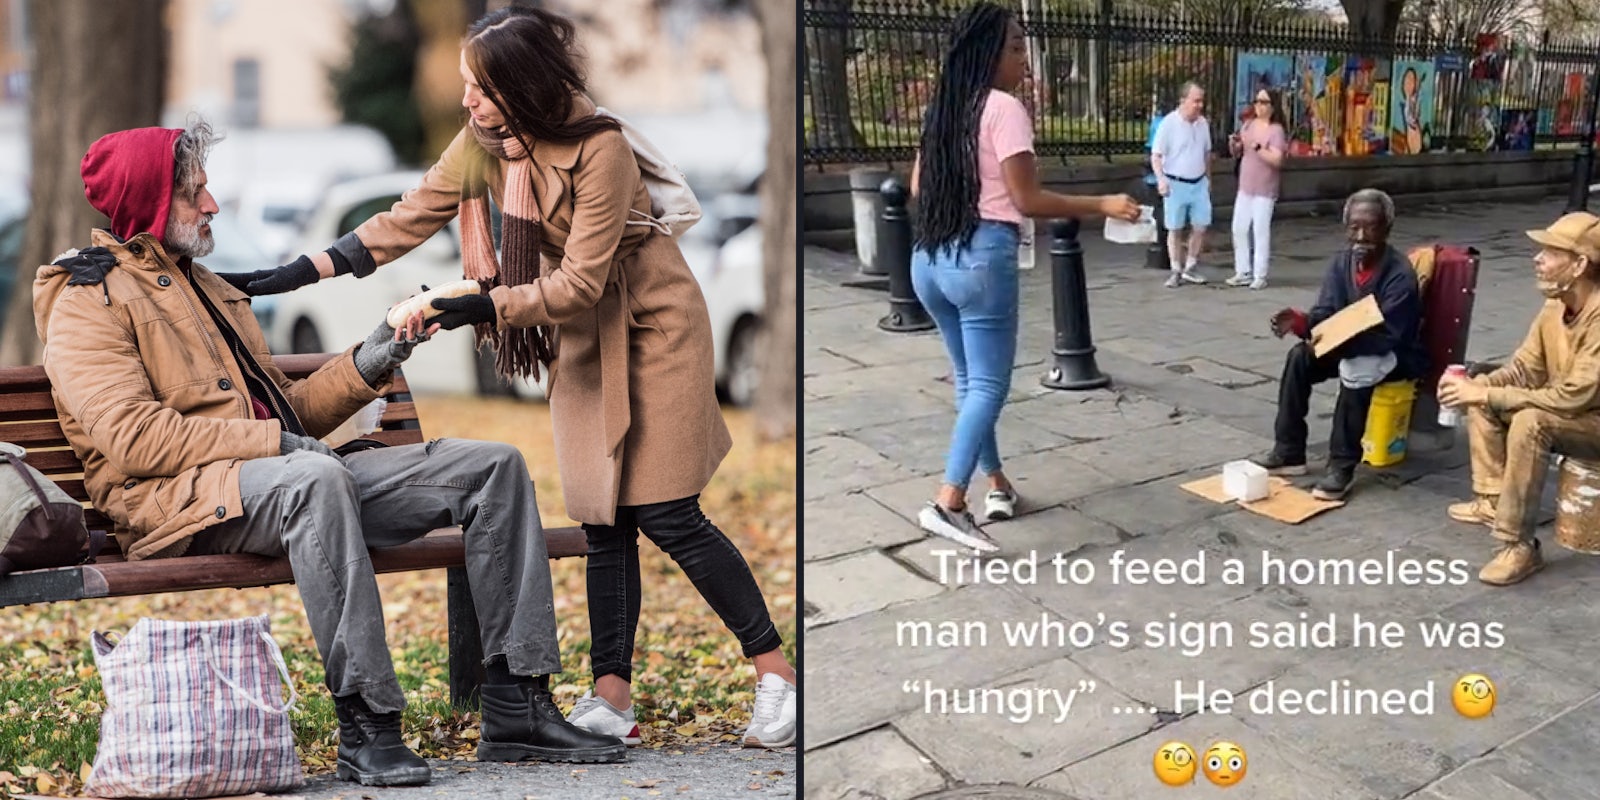 woman in city giving food to homeless (l) woman in city attempting to give homeless food caption ' Tried to feed a homeless man who's sign said he was hungry... he declined' (r)